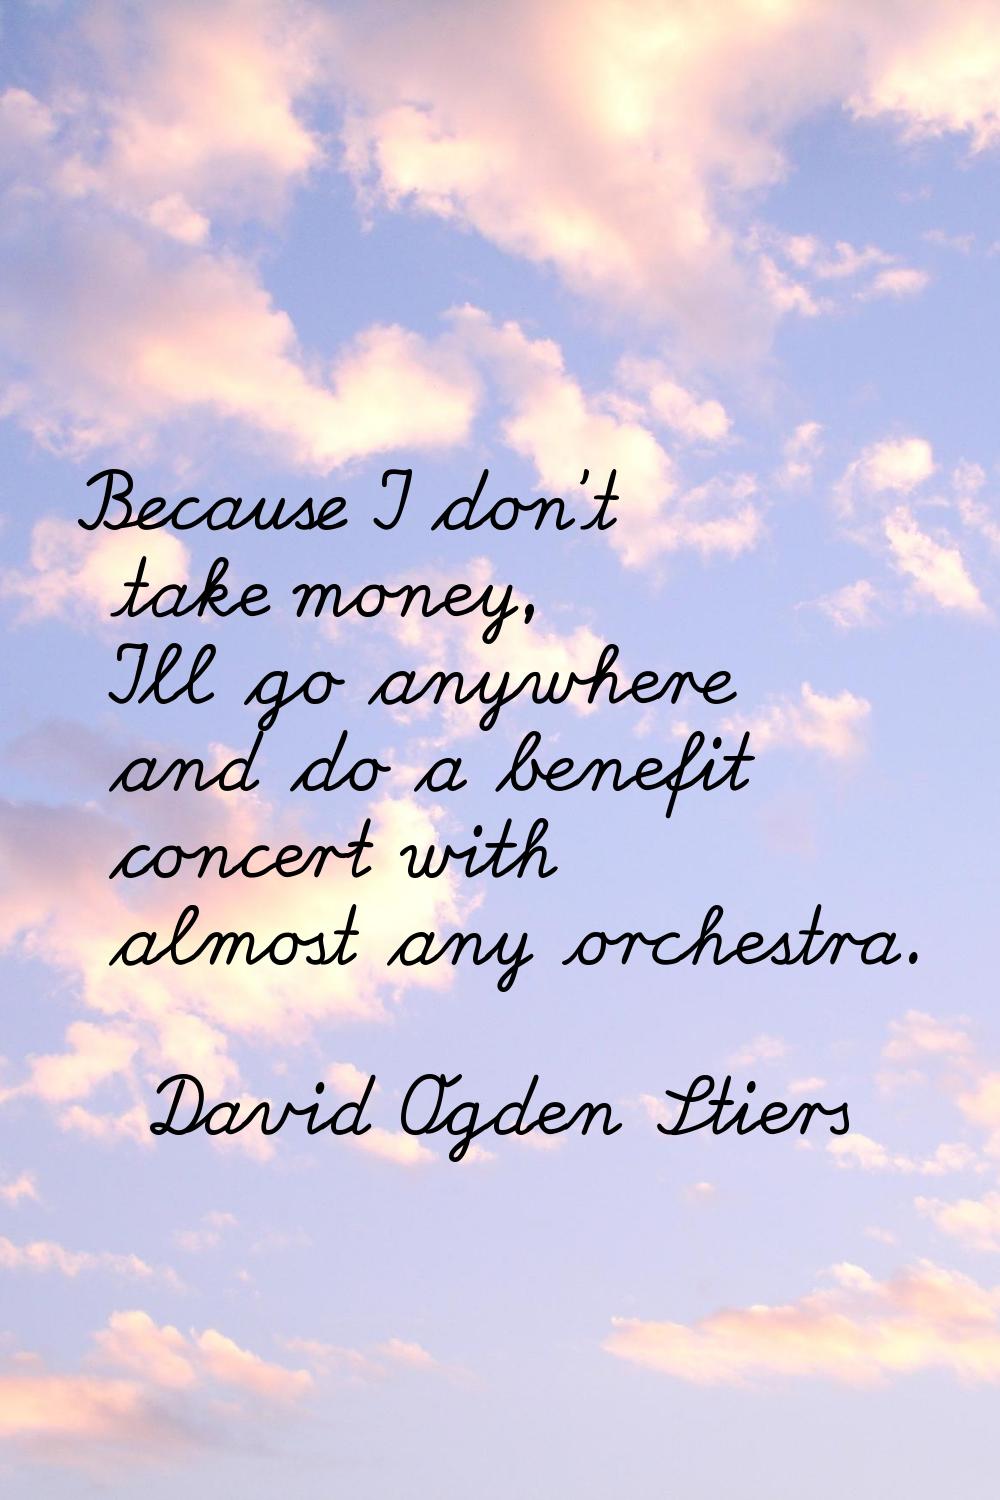 Because I don't take money, I'll go anywhere and do a benefit concert with almost any orchestra.